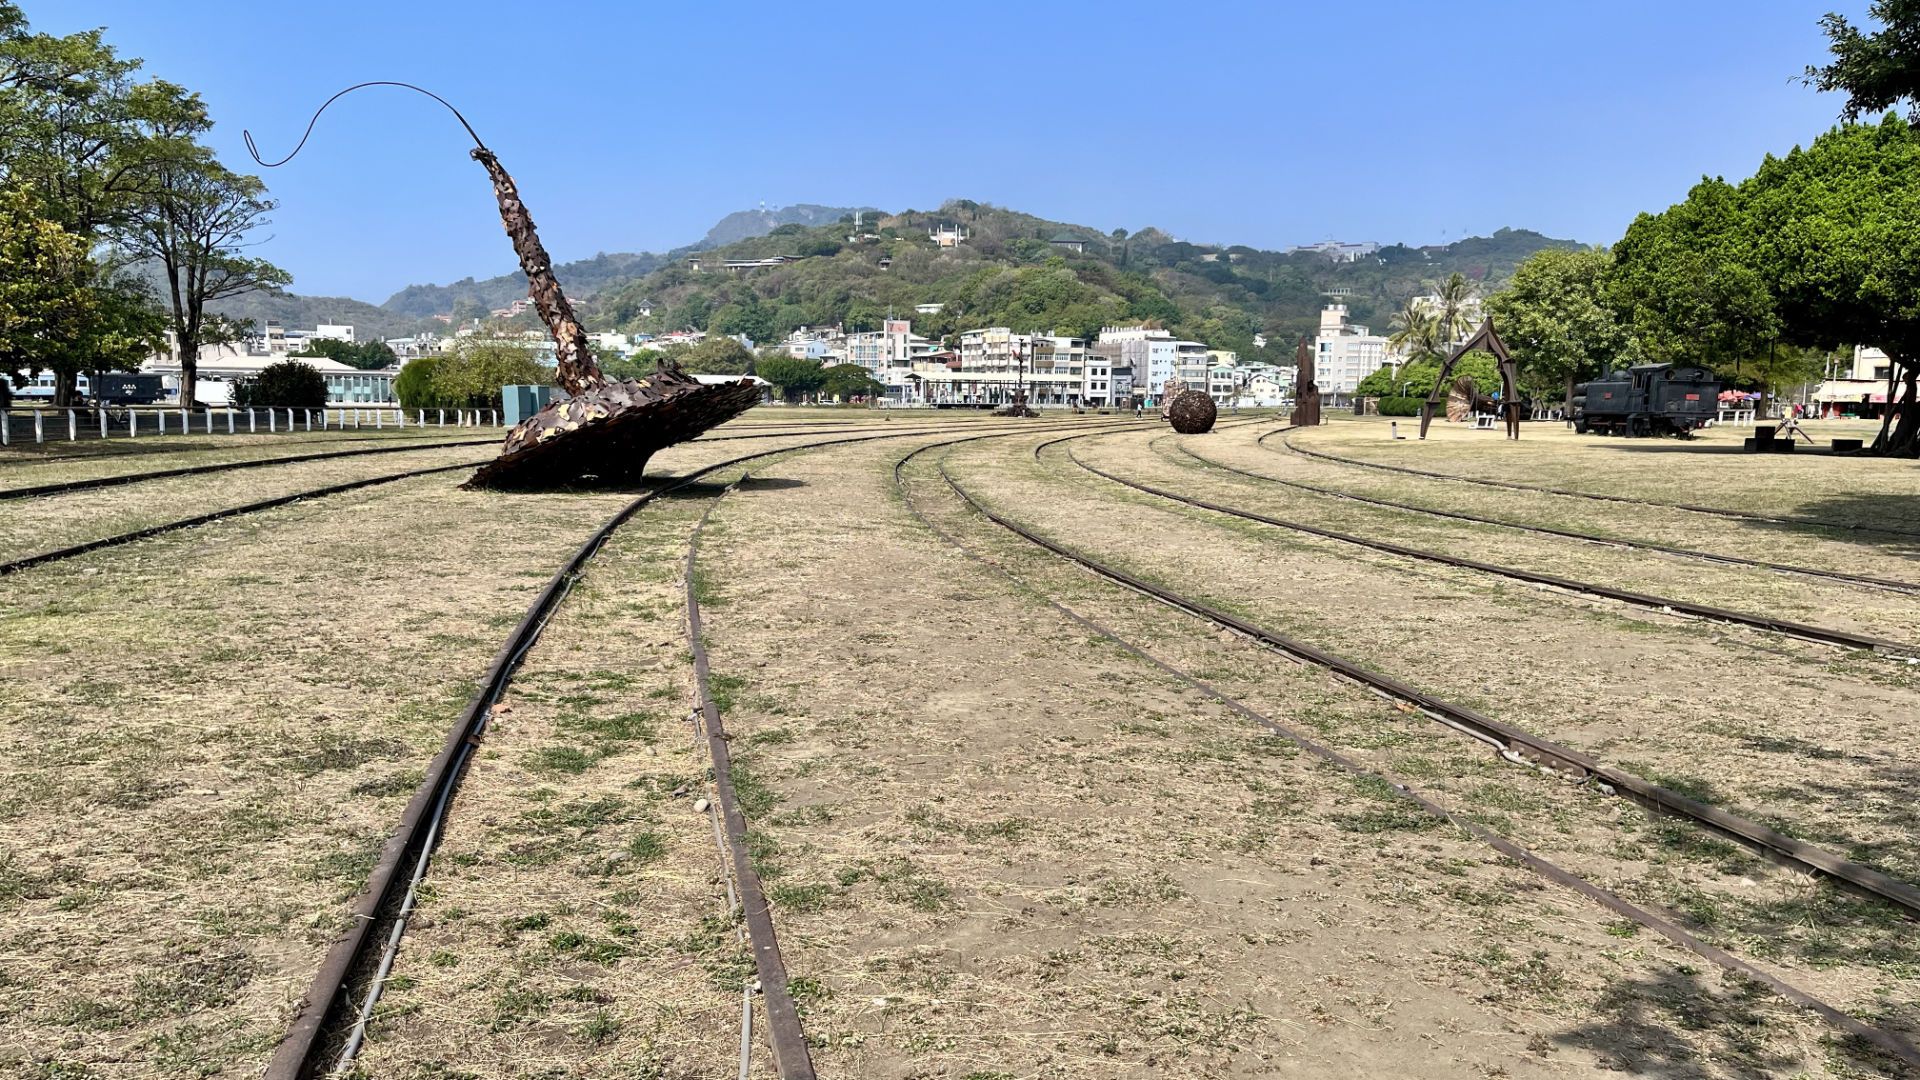 A metal sculpture of a giant spinning top, approximately 5 meters tall, resting on disused railway tracks.